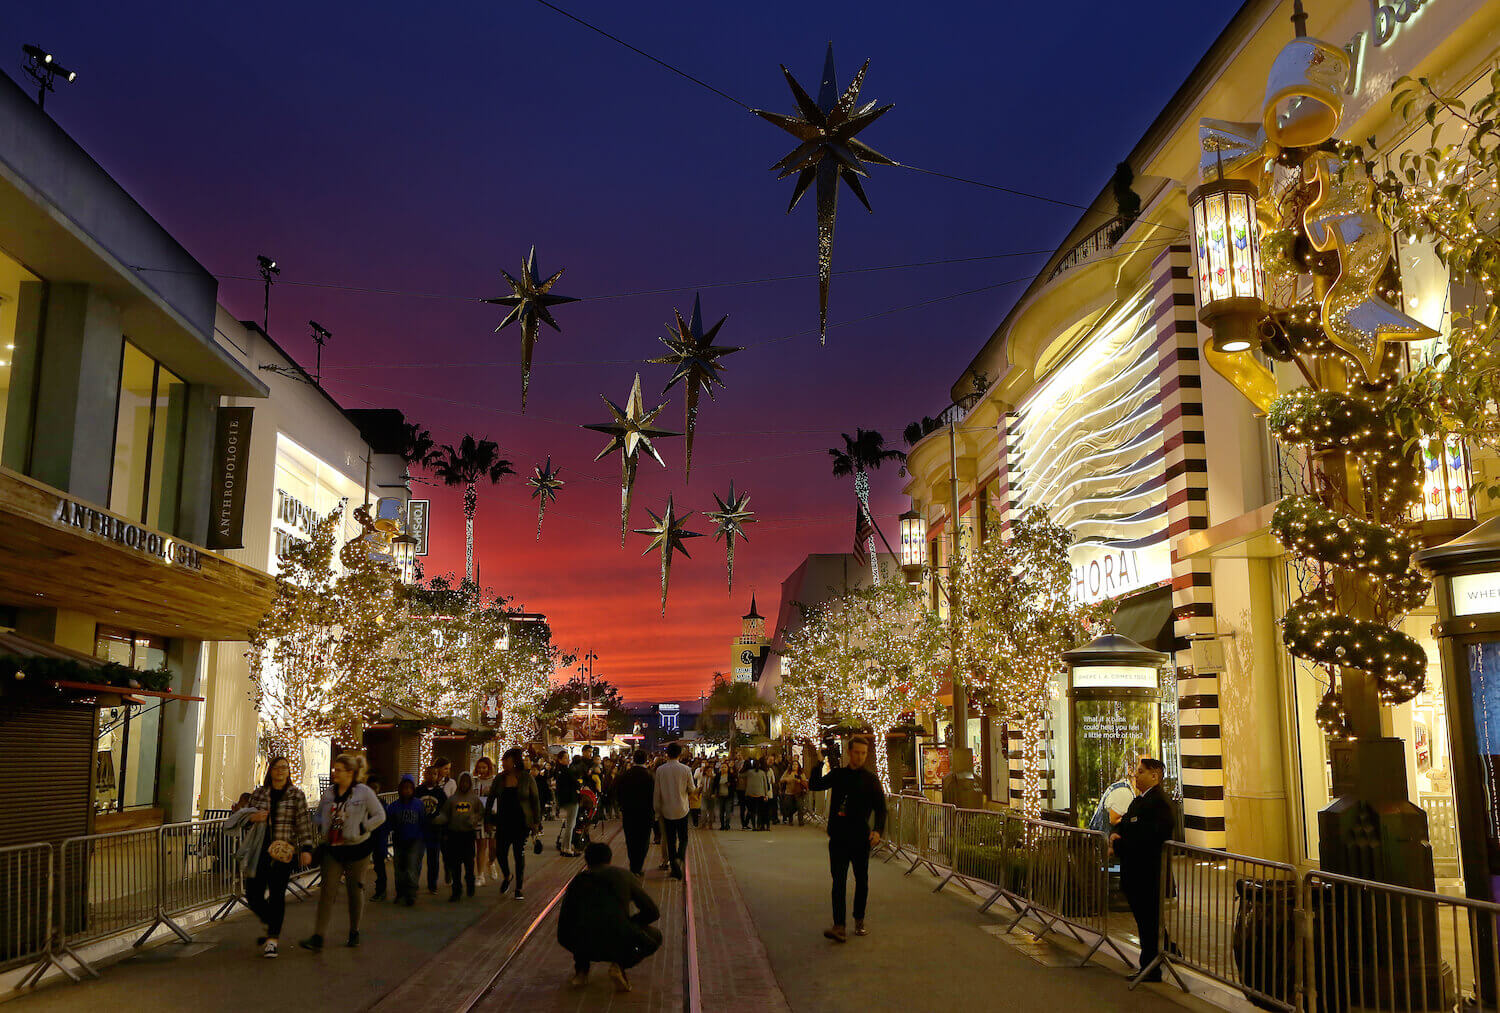 “A California Christmas at the Grove” Official Tree Lighting Ceremony